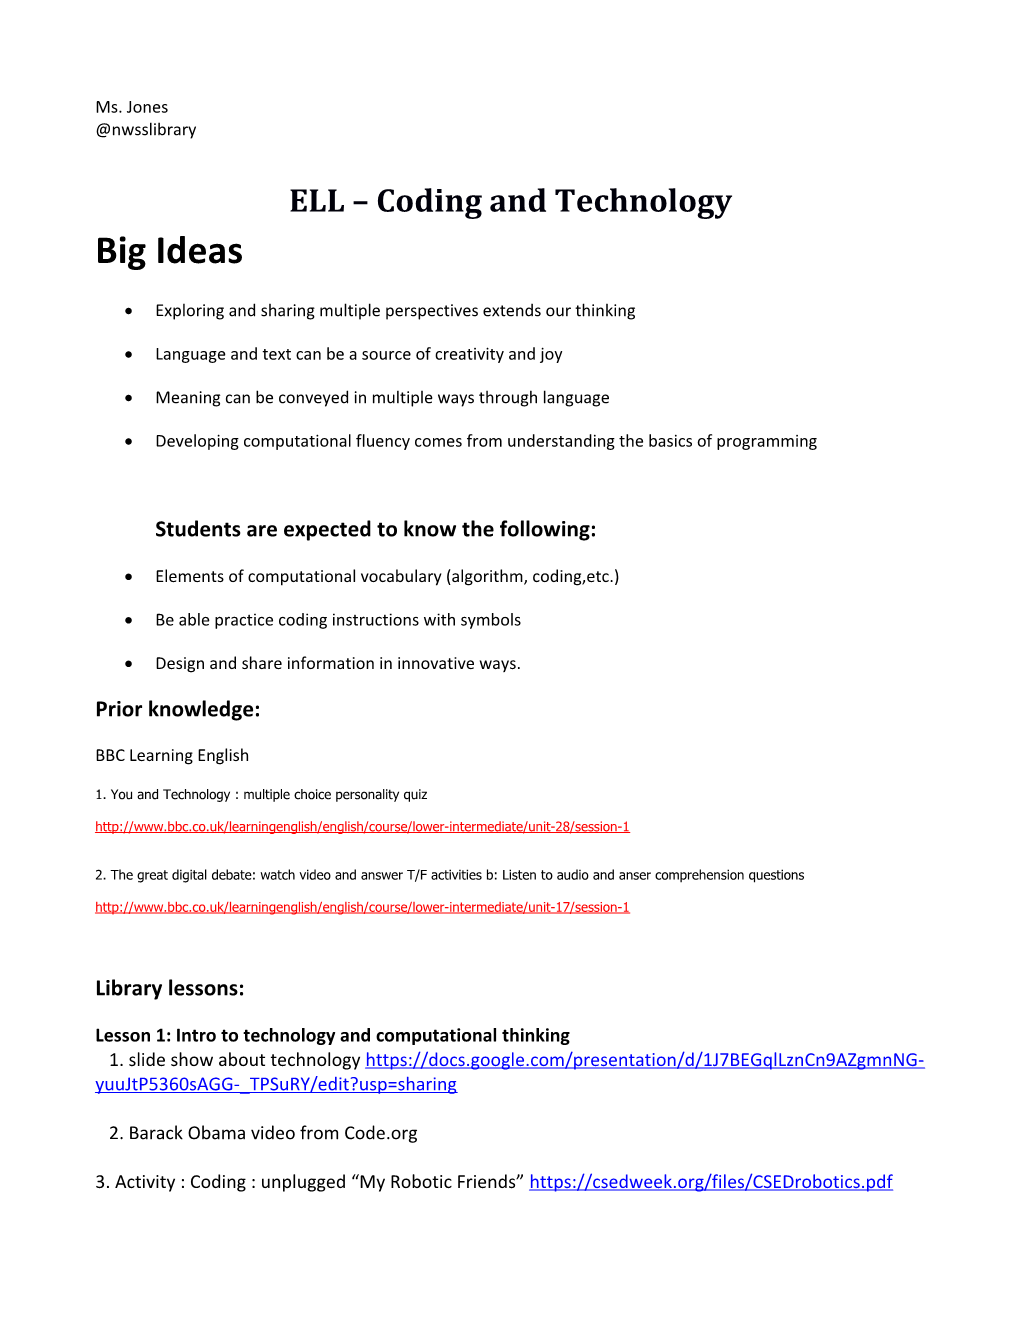 ELL Coding and Technology